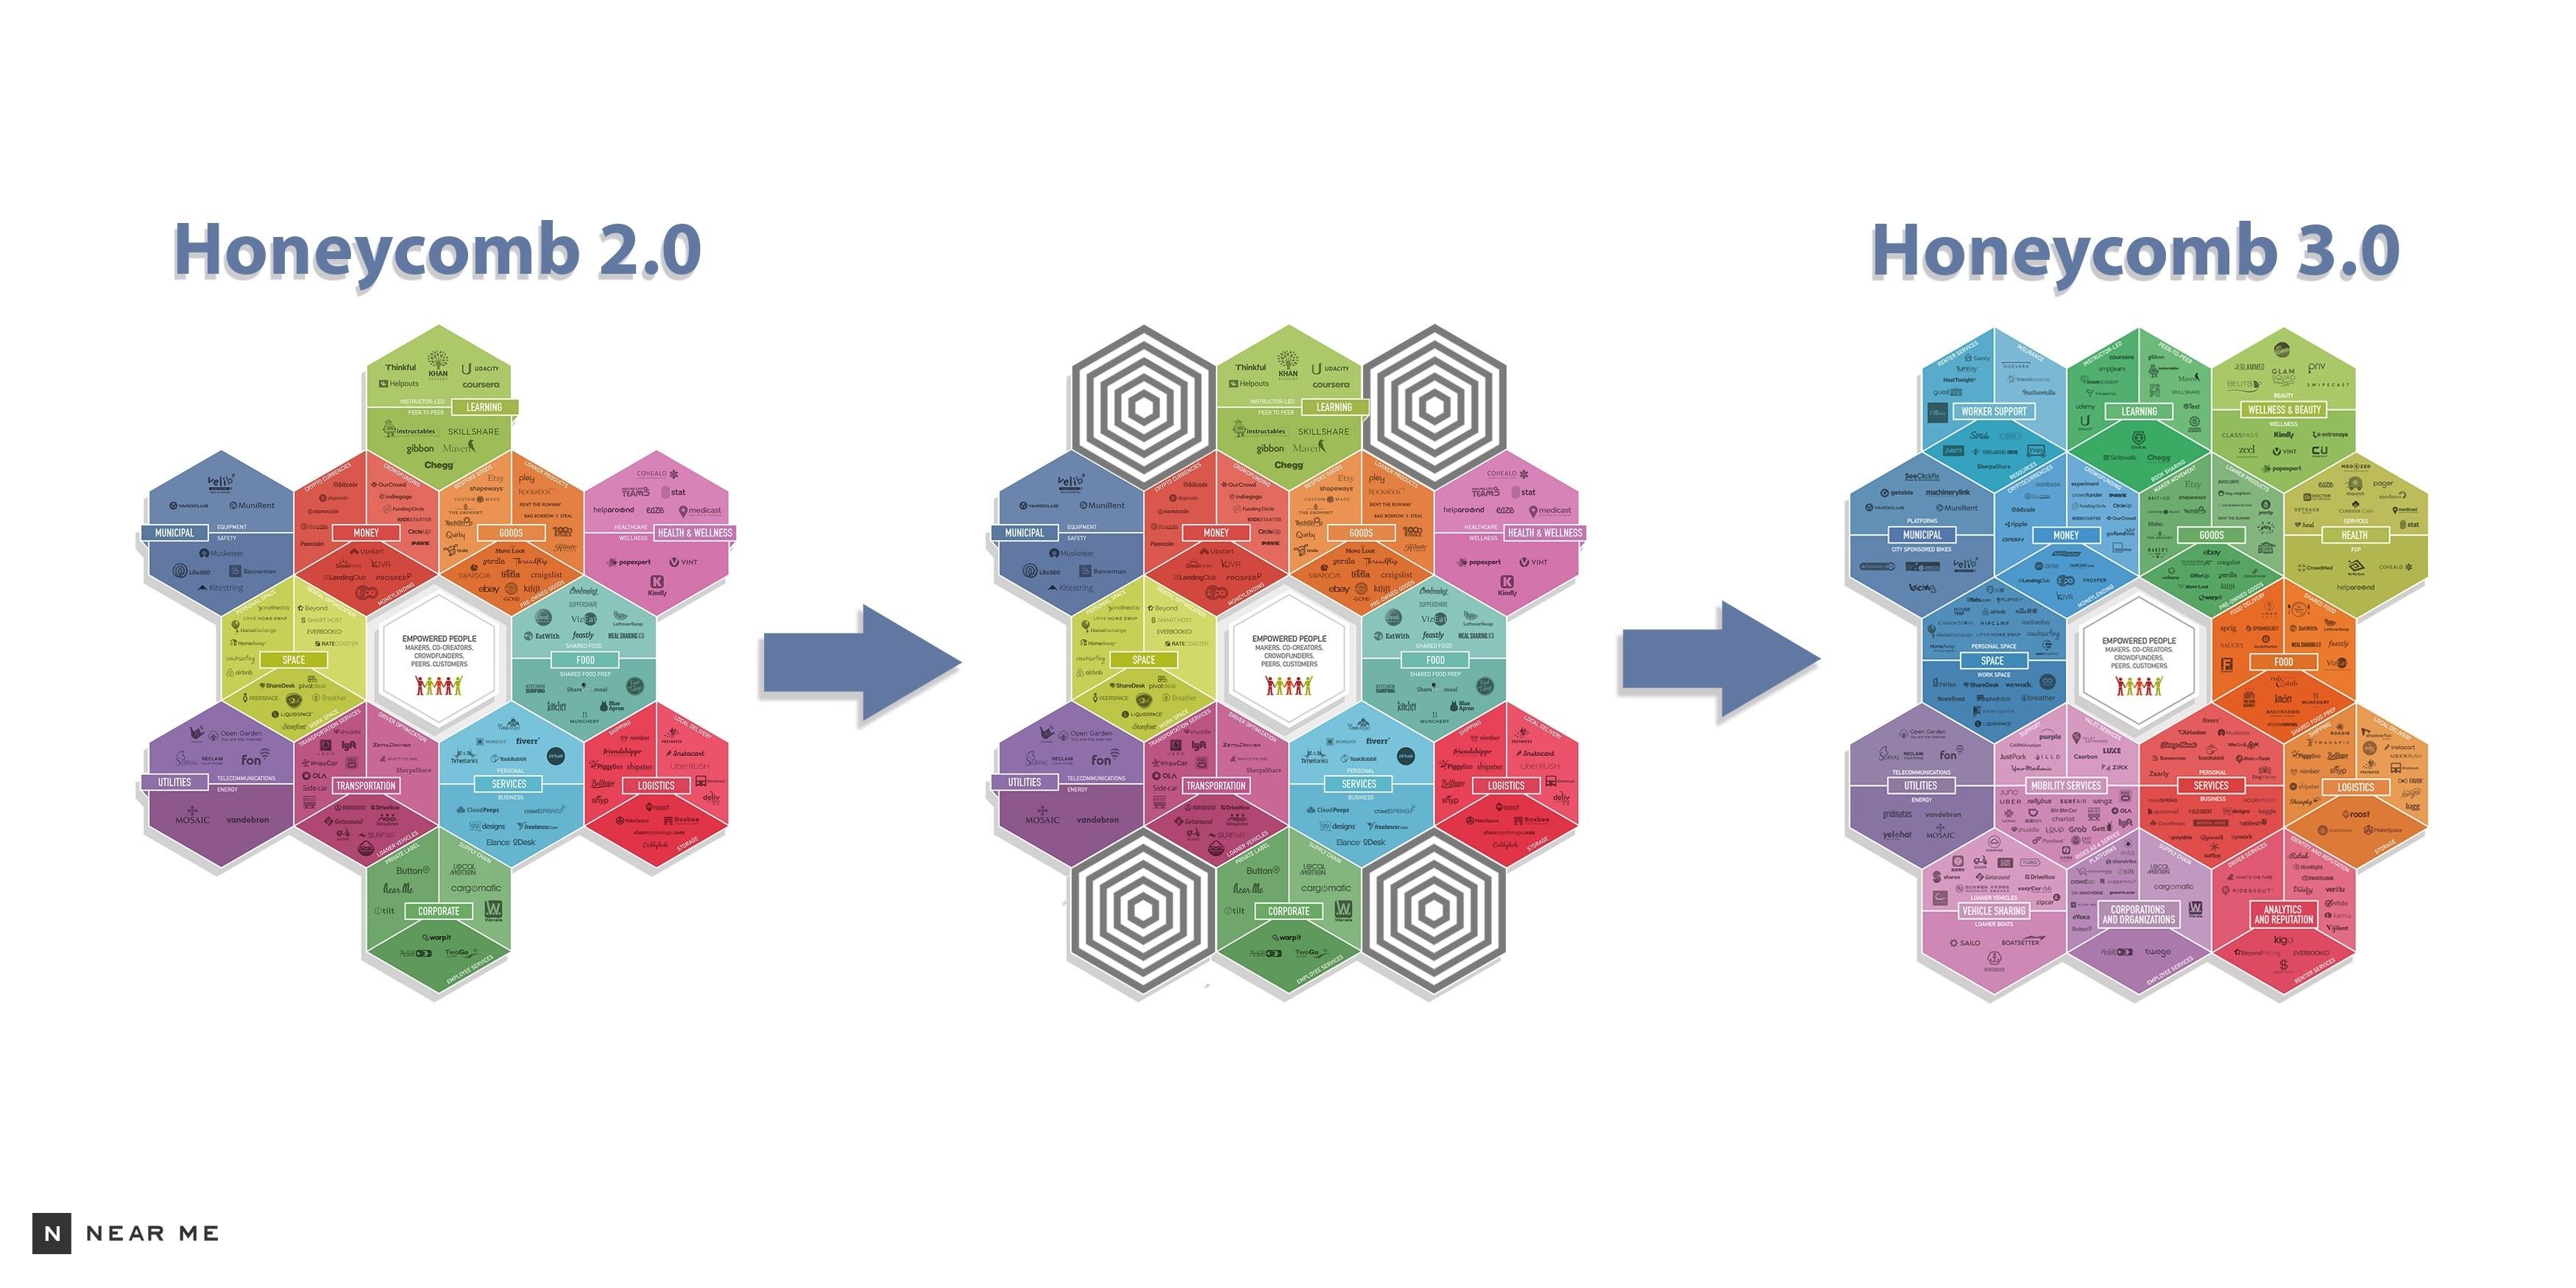 The Collaborative Economy Honeycomb is Growing